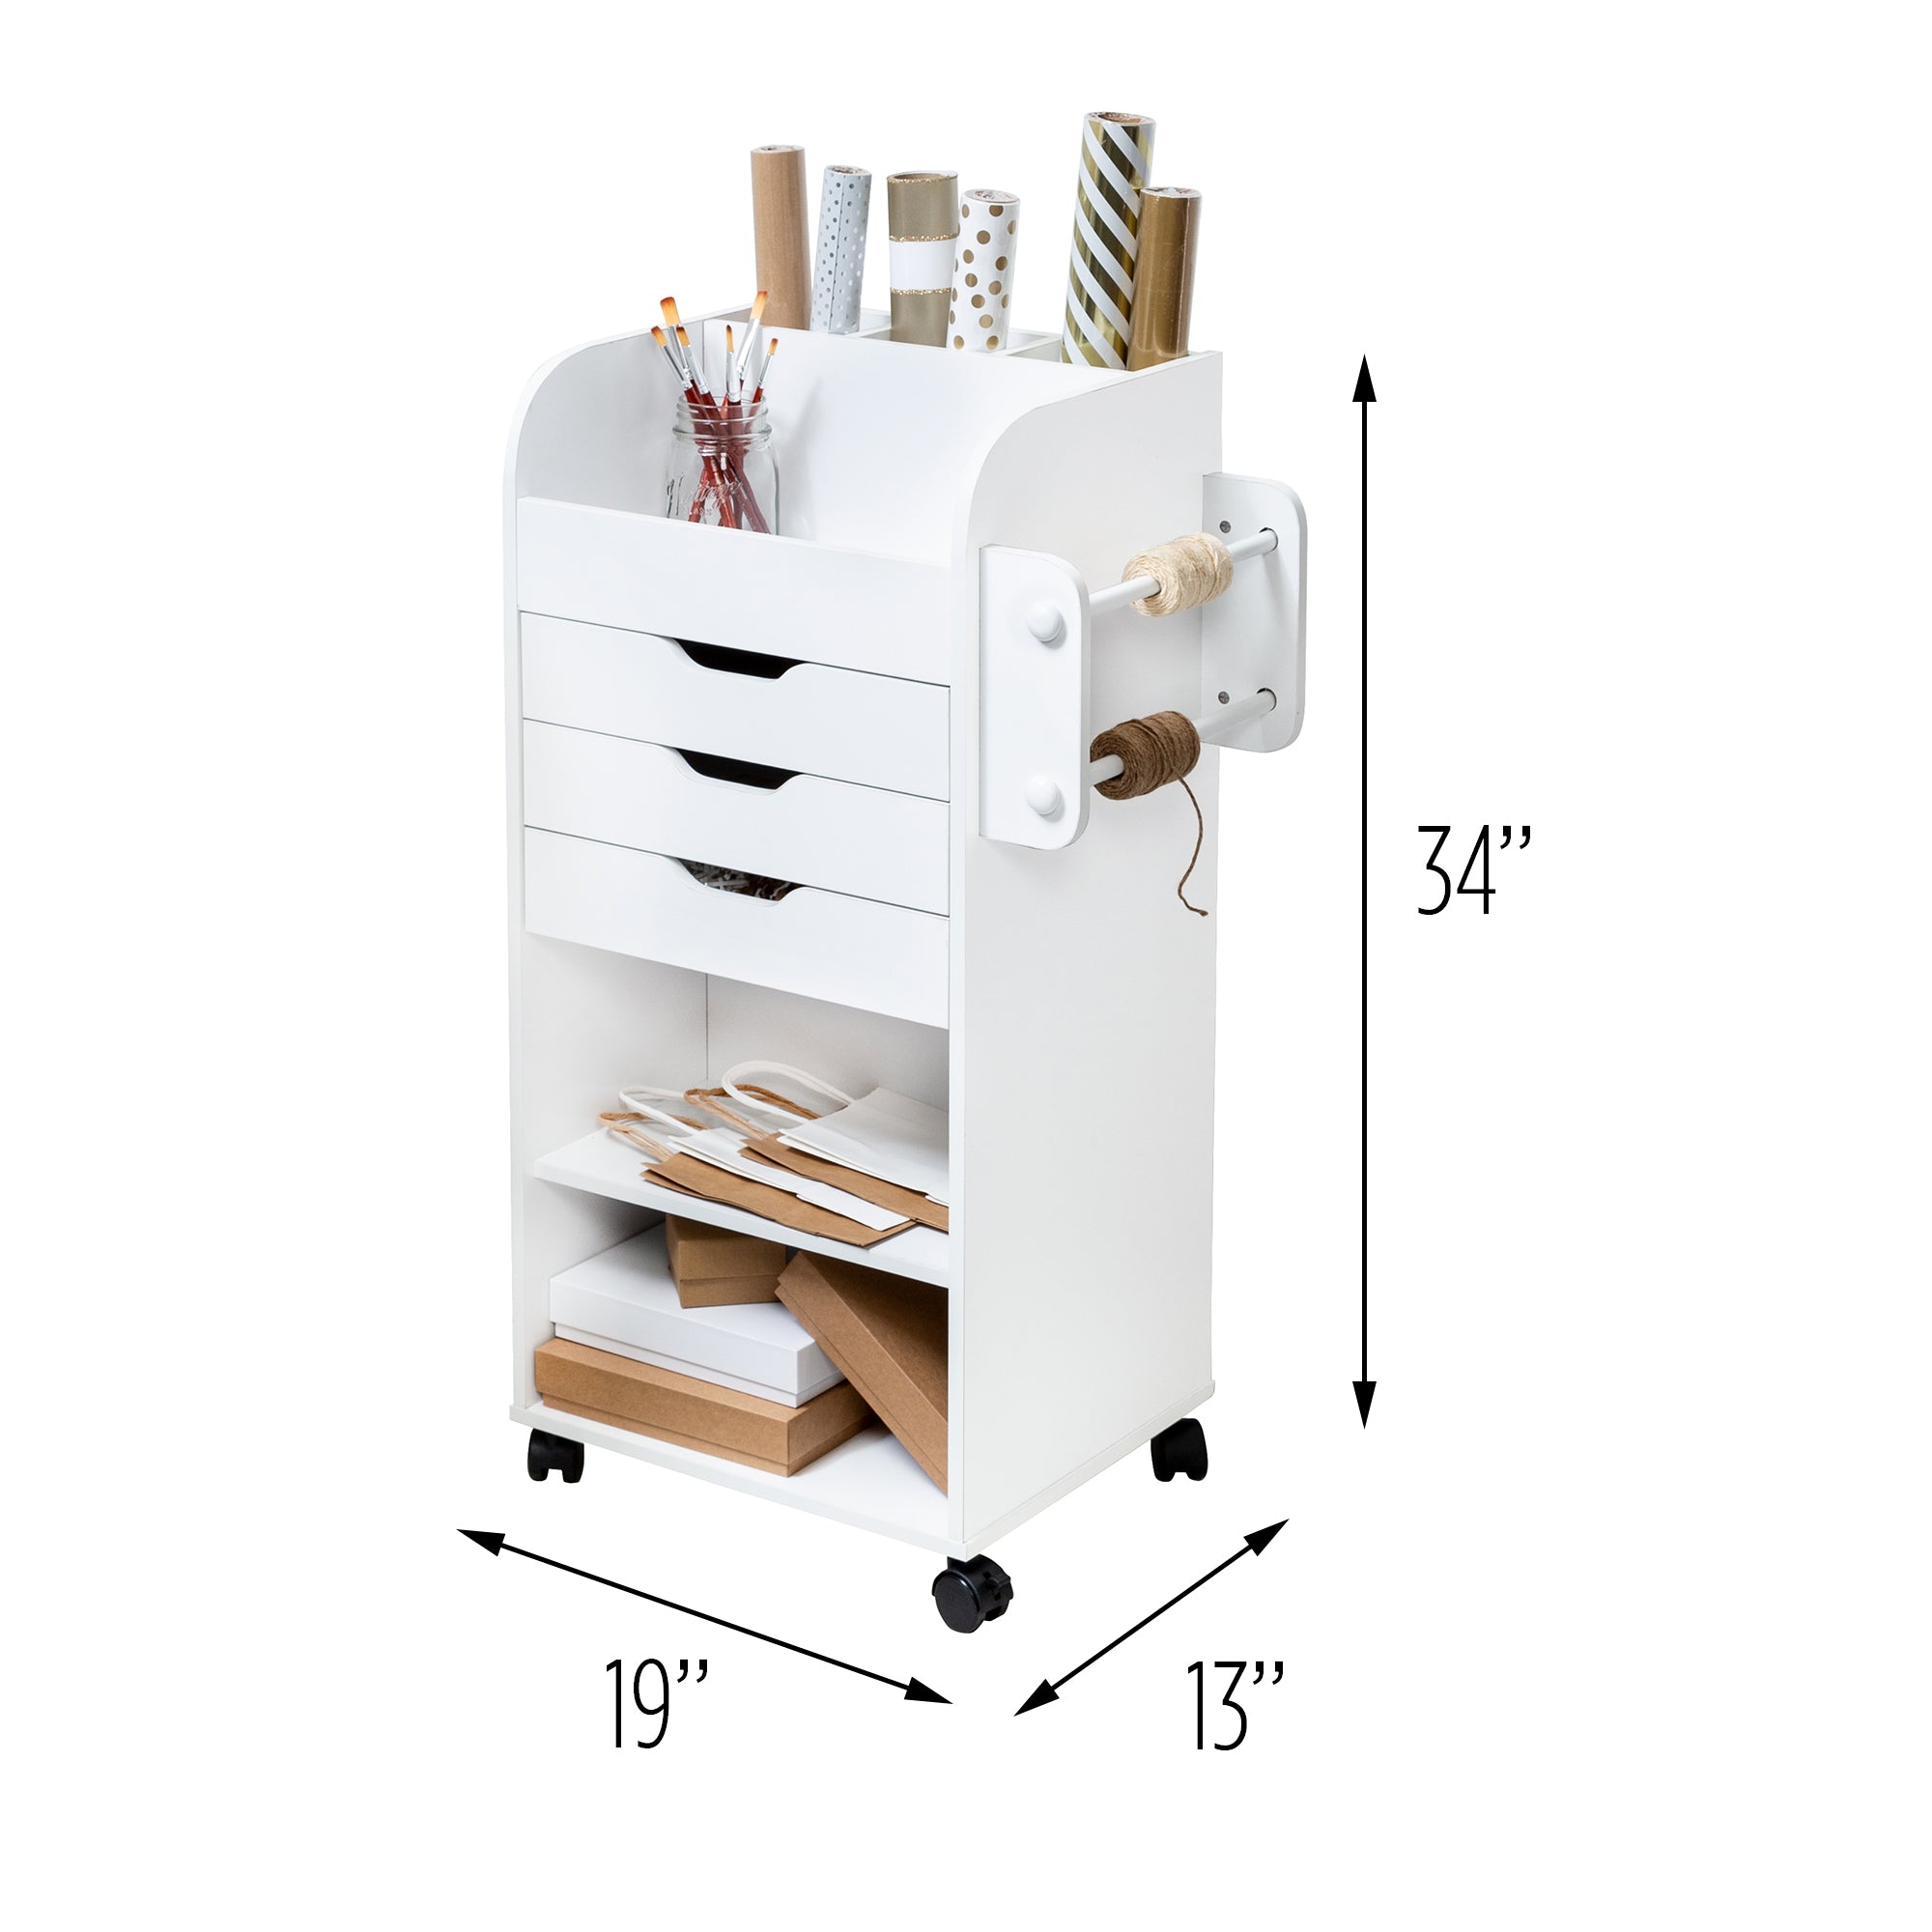 Gift wrapping cart